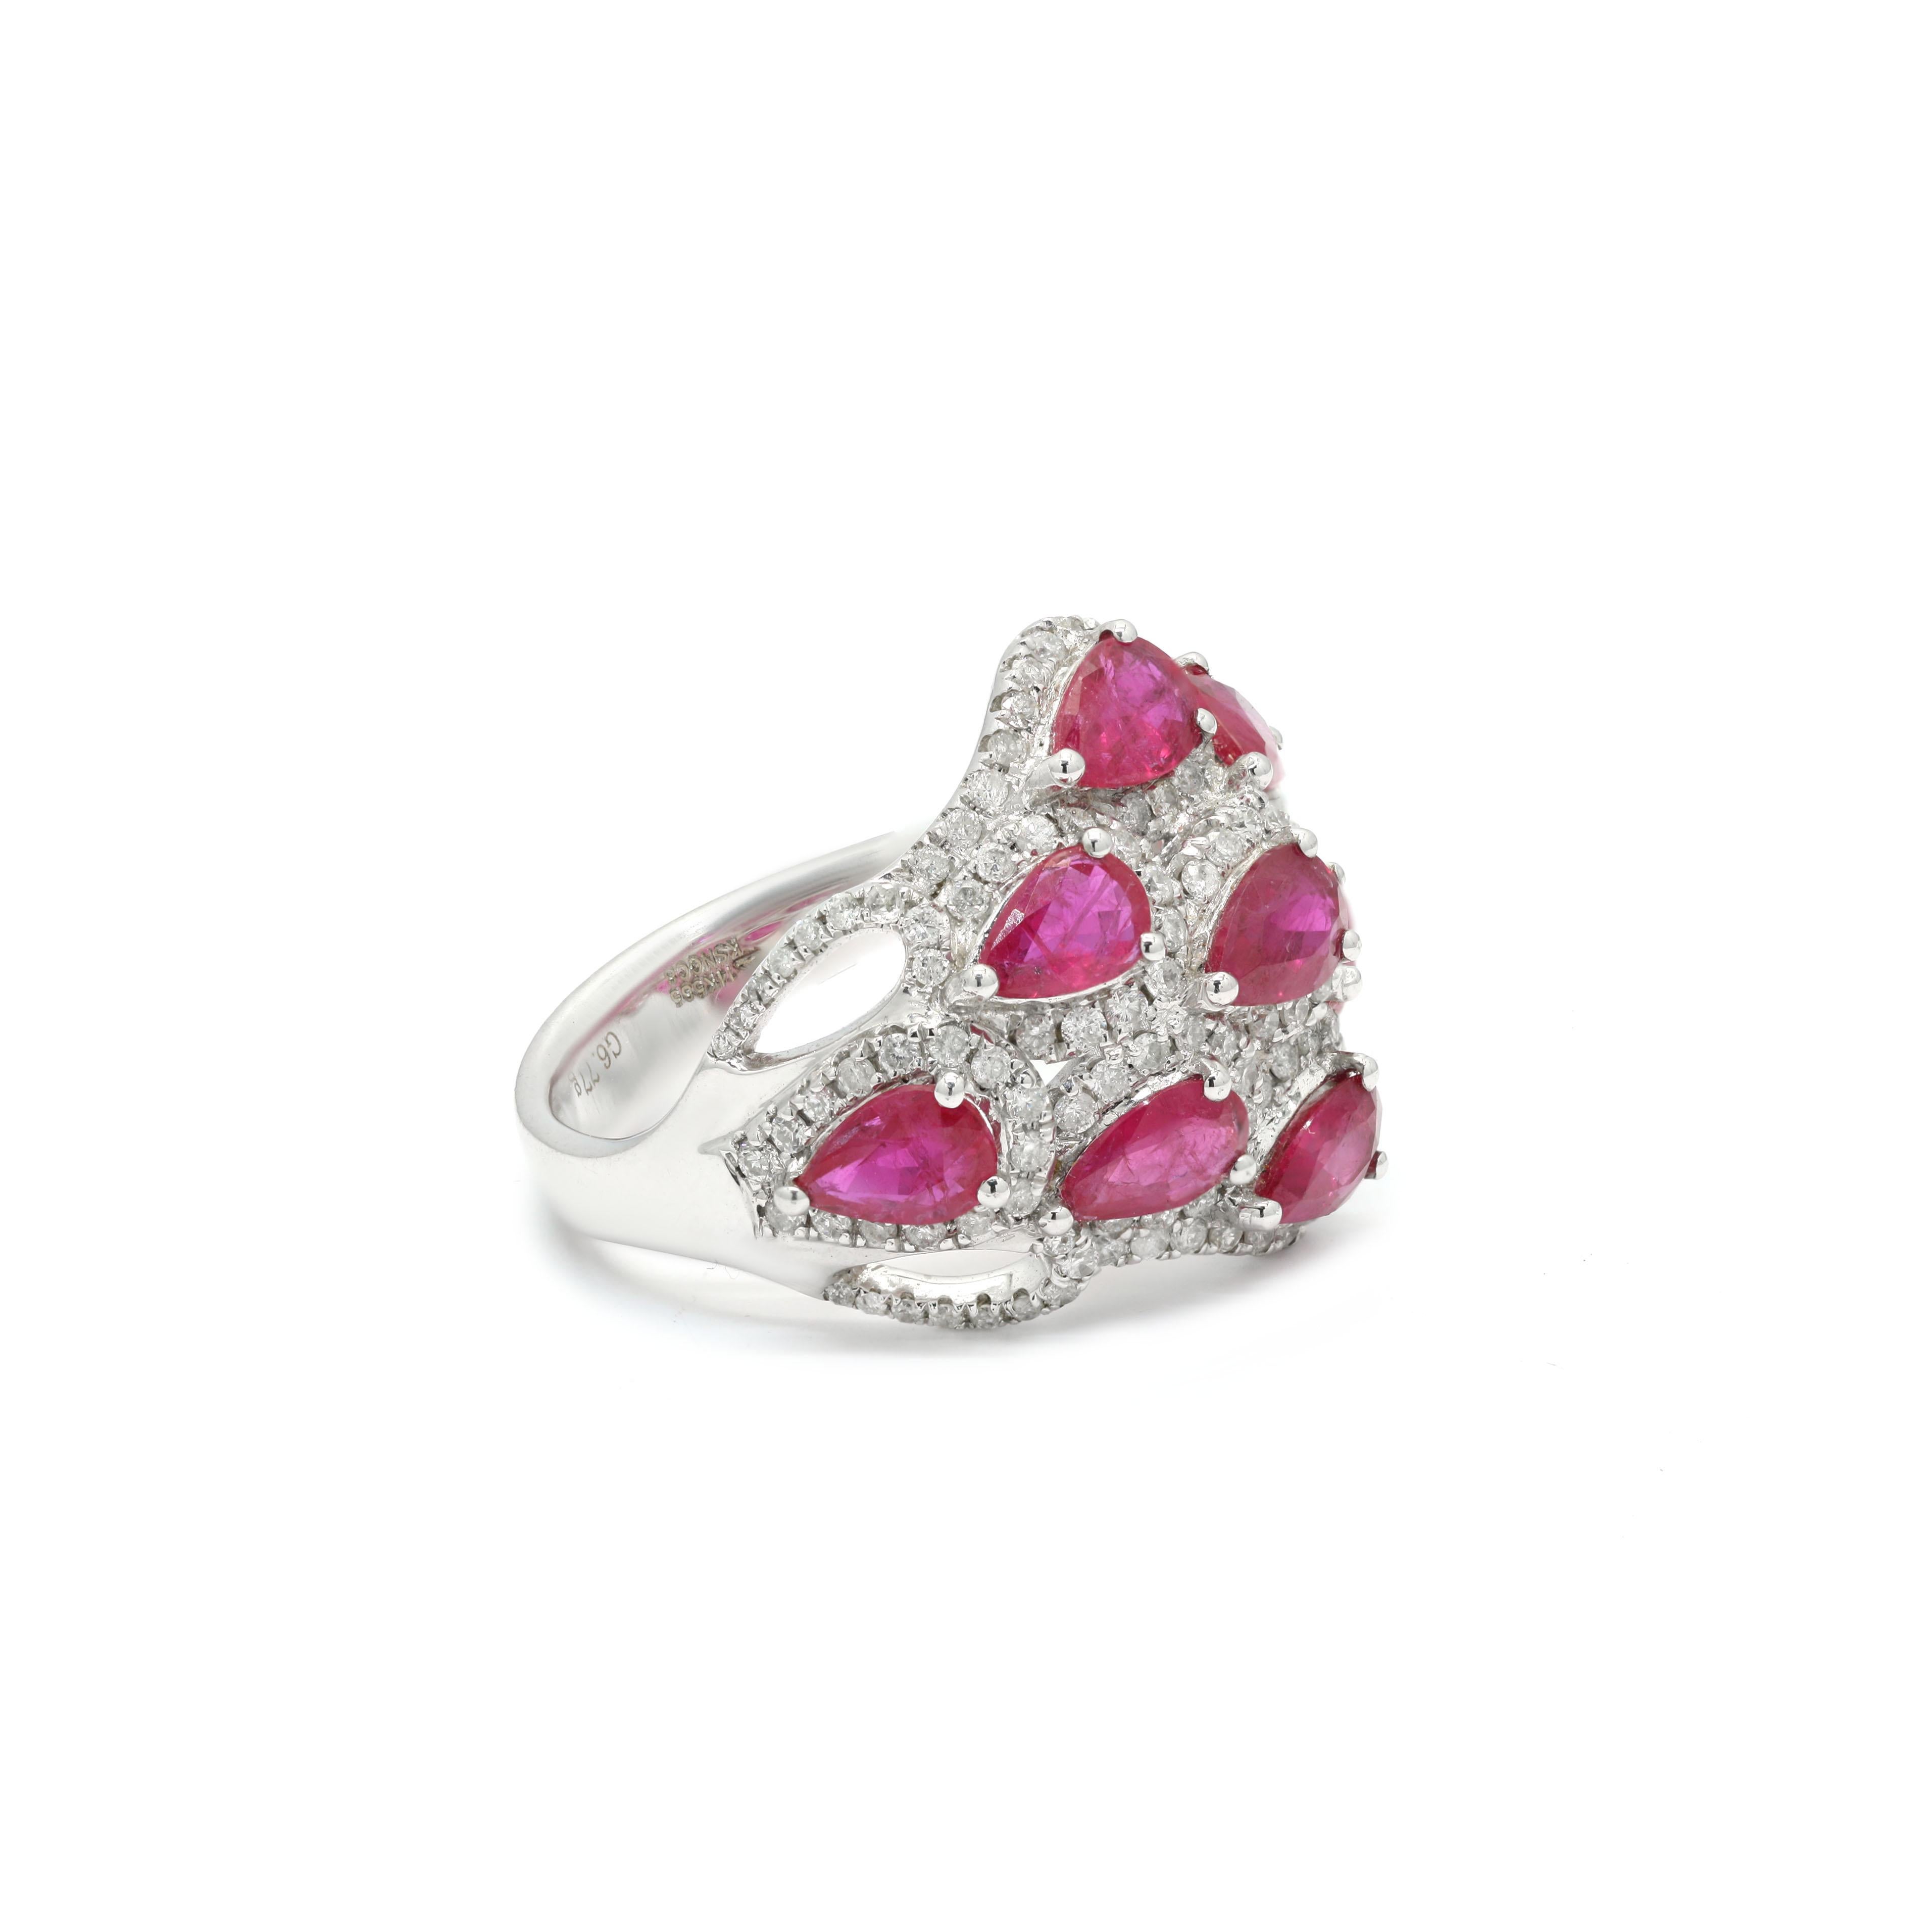 For Sale:  2.01 Carat Ruby and Diamond Cocktail Ring in 18K White Gold  3